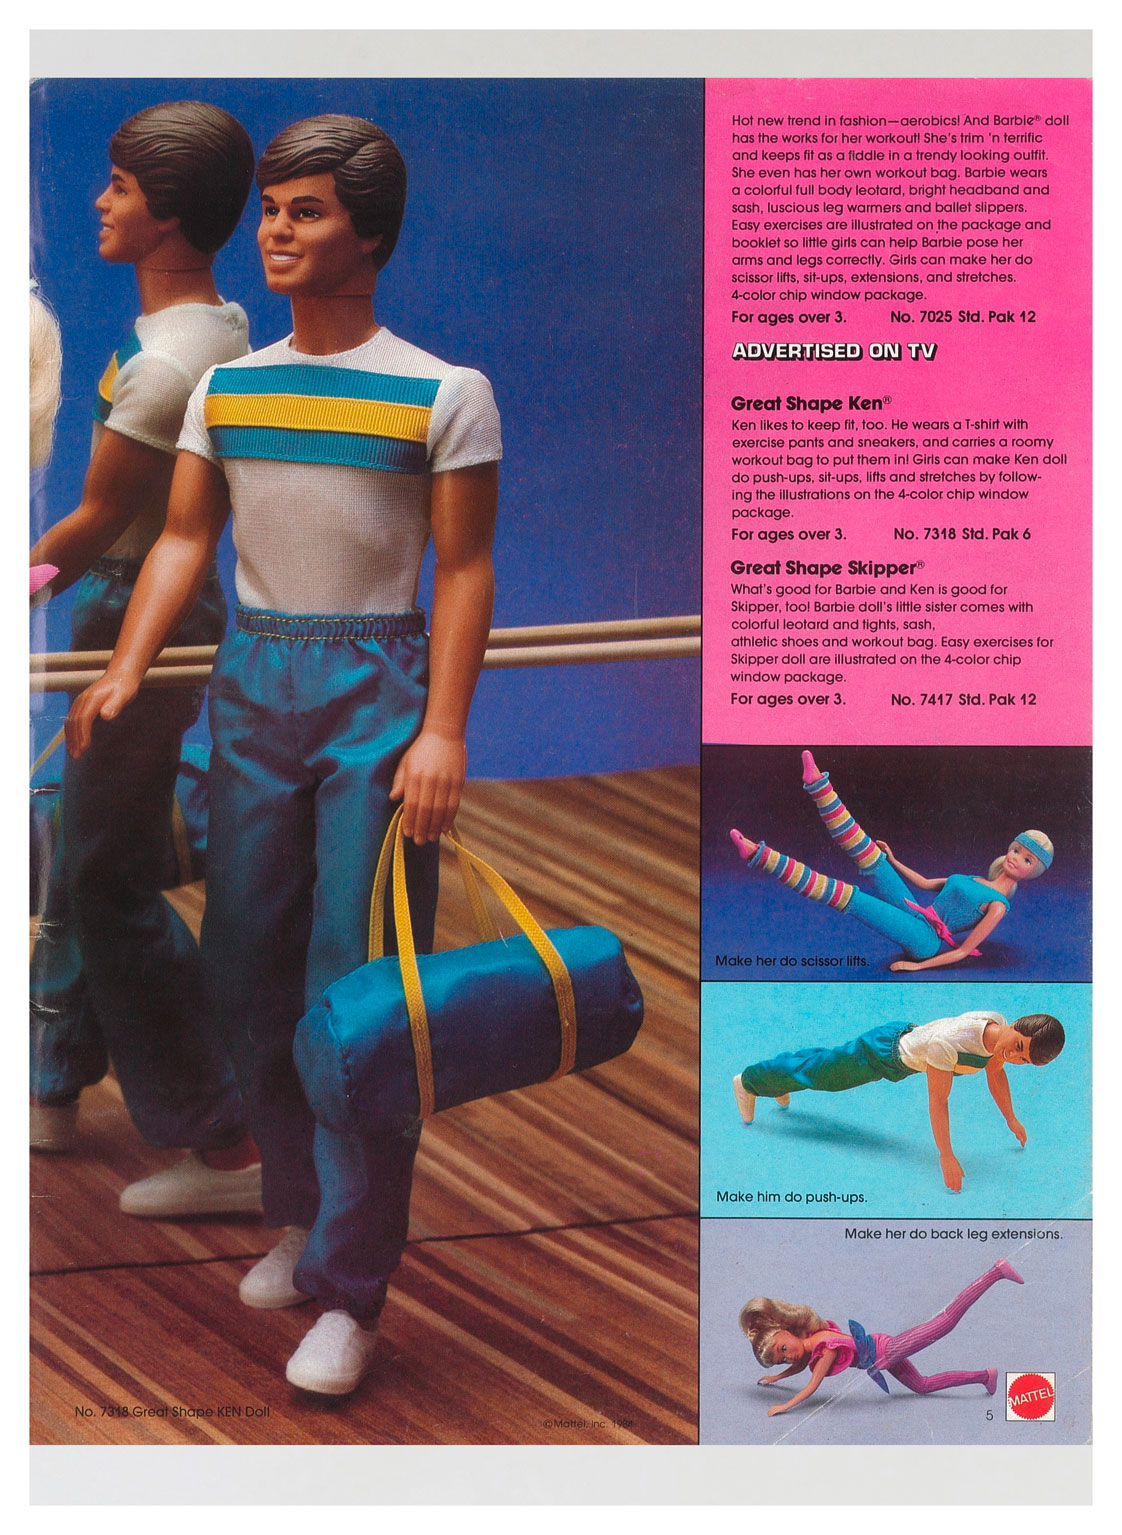 From 1984 Mattel Toys catalogue